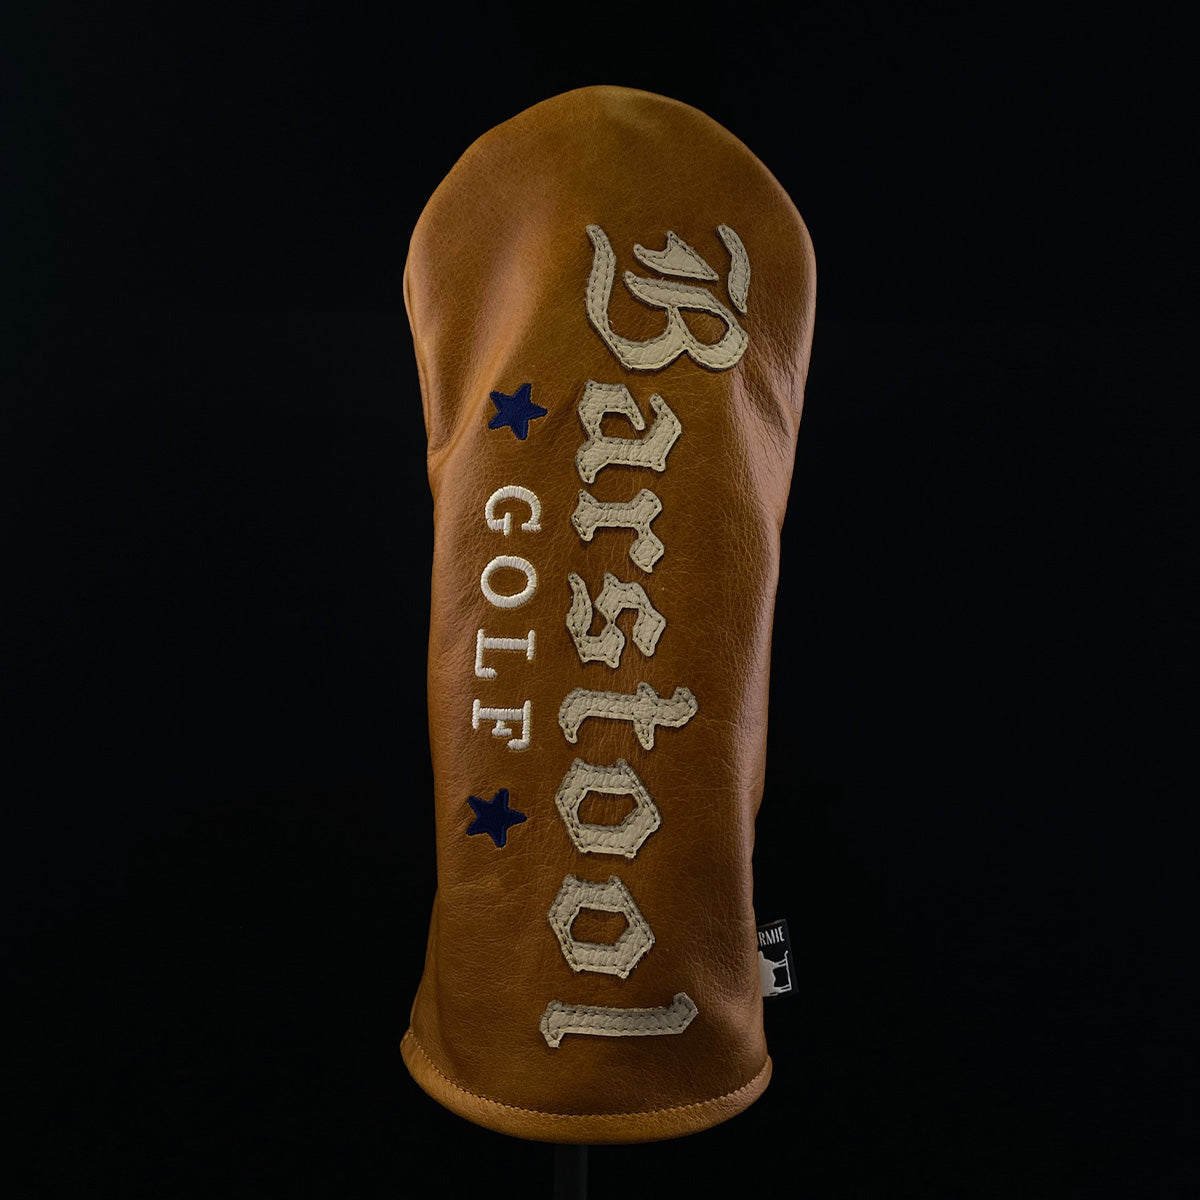 Dormie Workshop x Barstool Golf Olde Premium Driver Cover-Golf Accessories-Fore Play-One Size-Tan-Barstool Sports